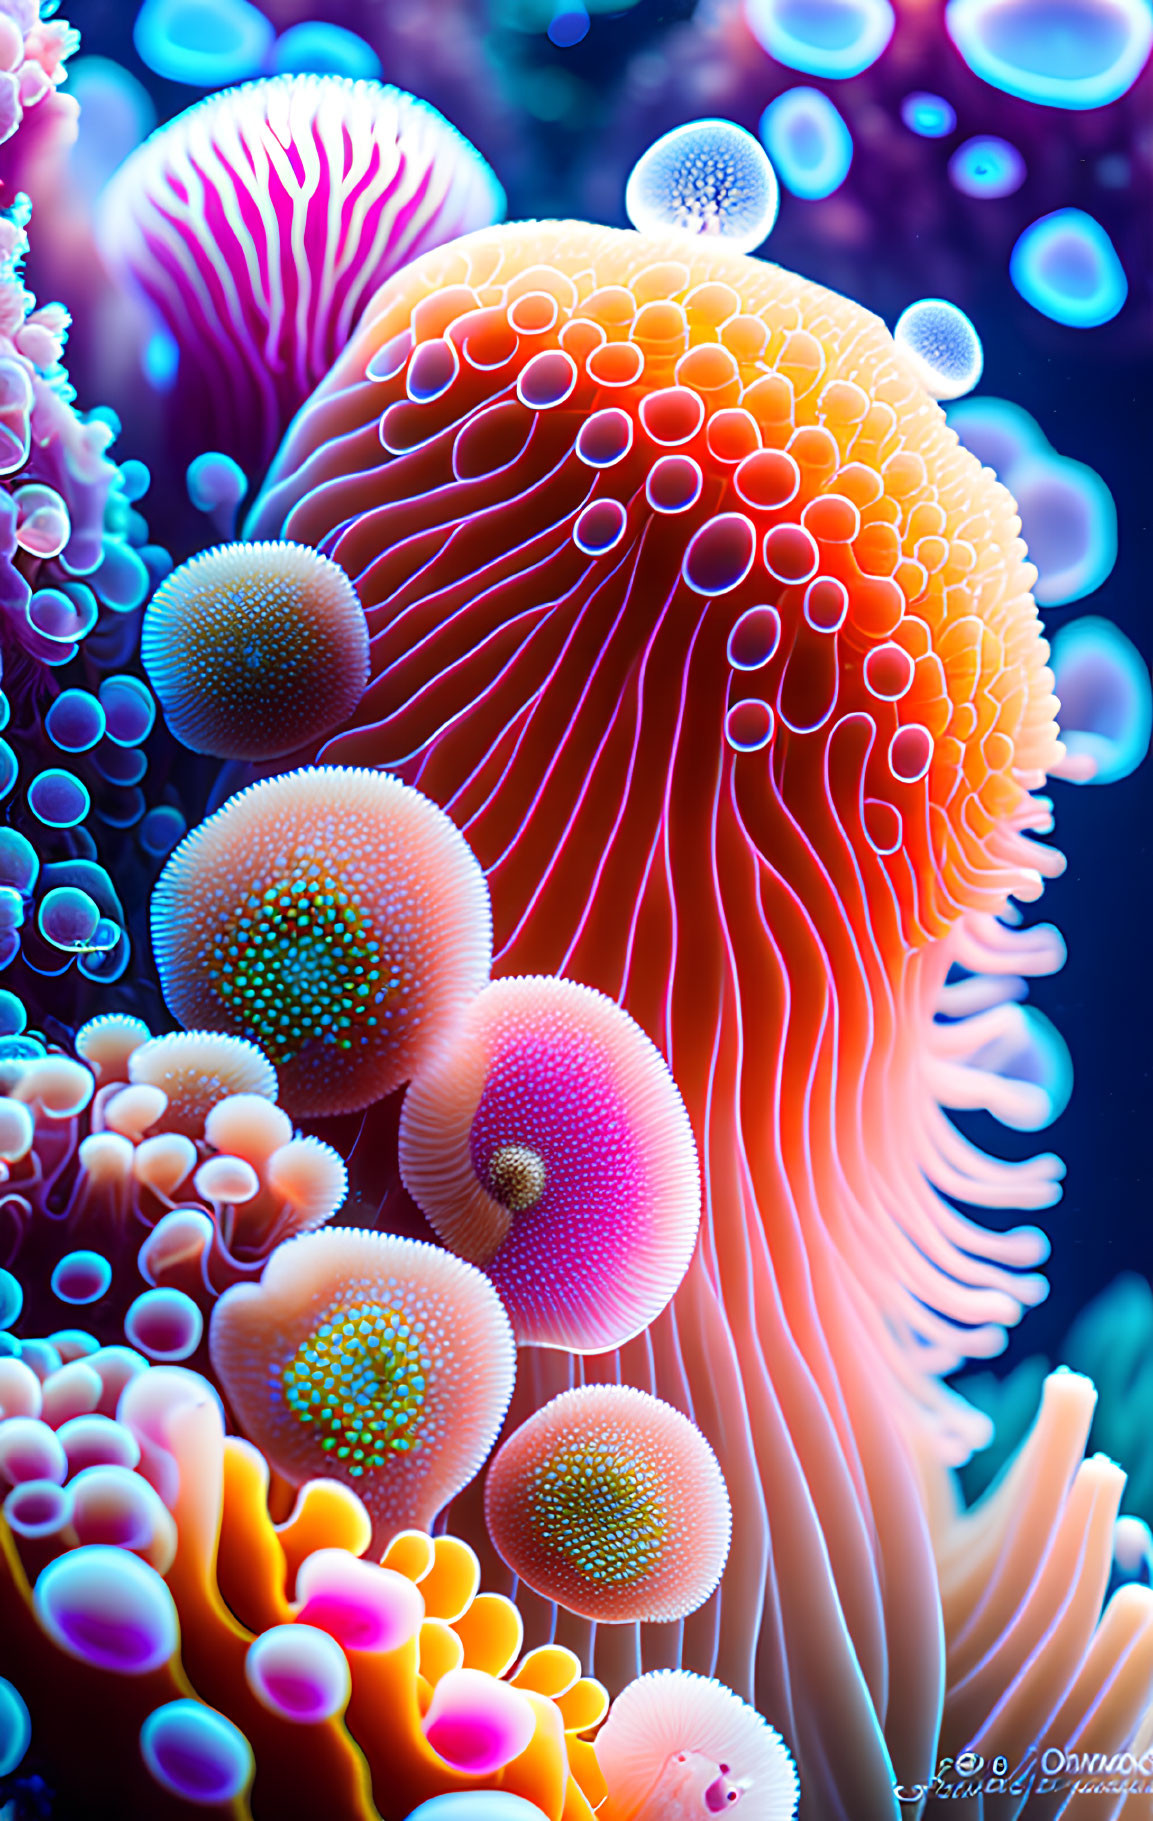 Colorful Underwater Jellyfish and Coral Scene Displaying Vibrant Hues